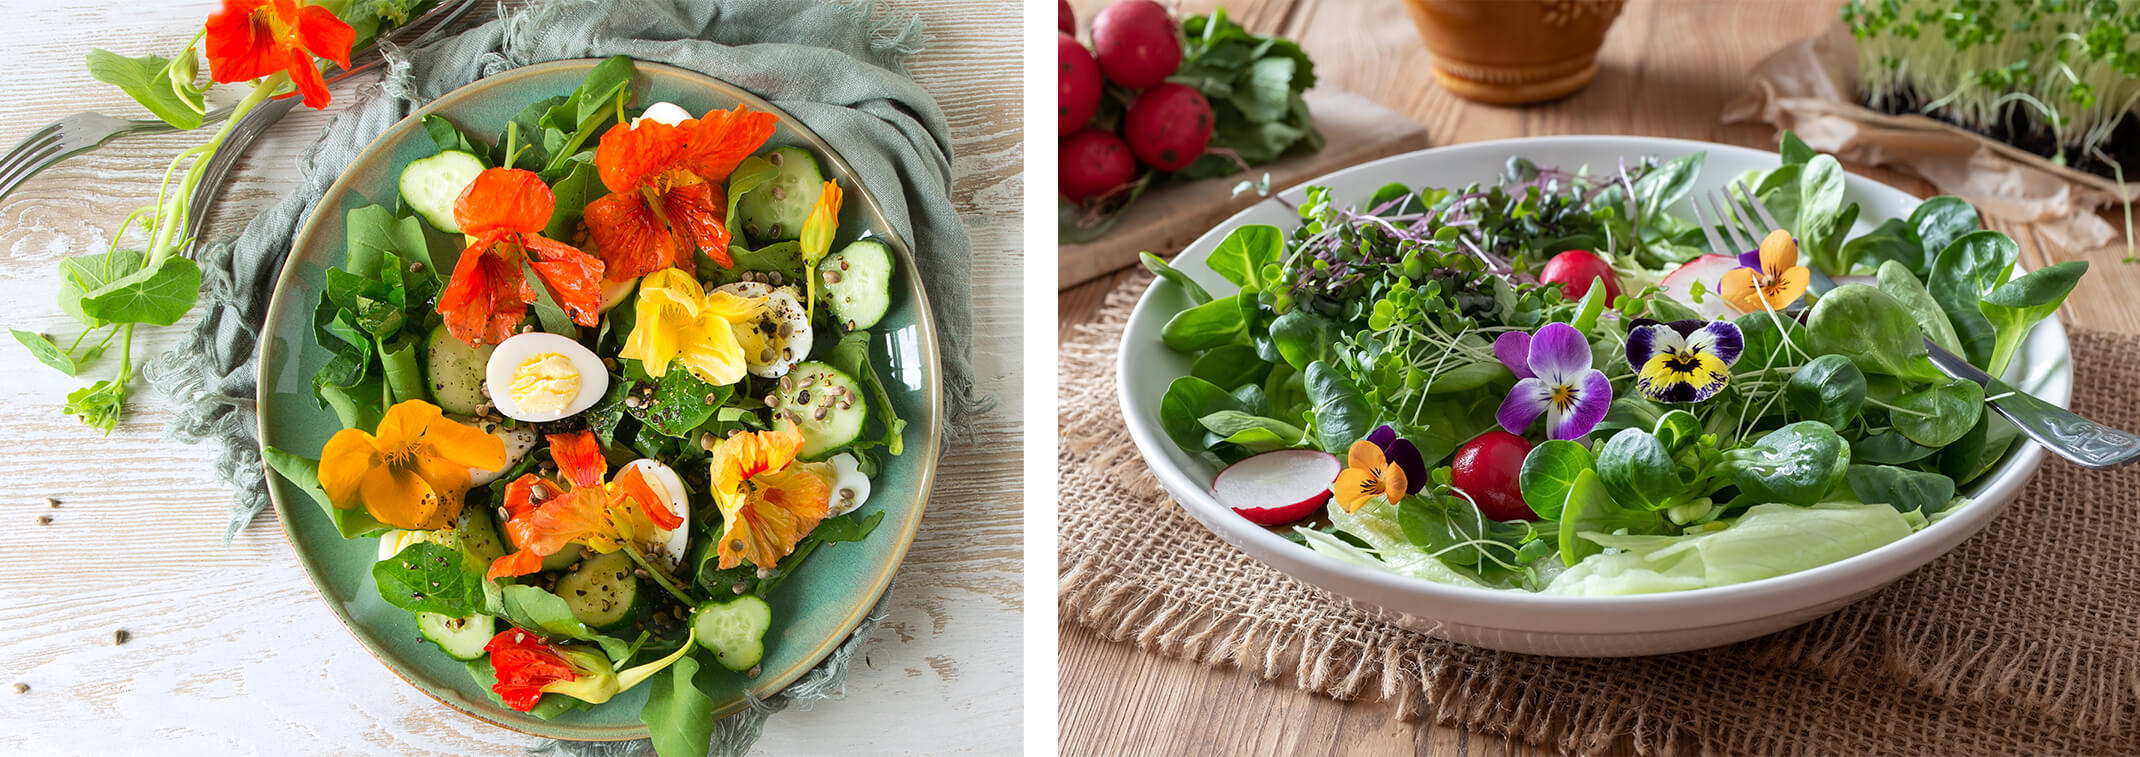 2 images - a plate and a bowl filled with an edible salad that includes edible flowers